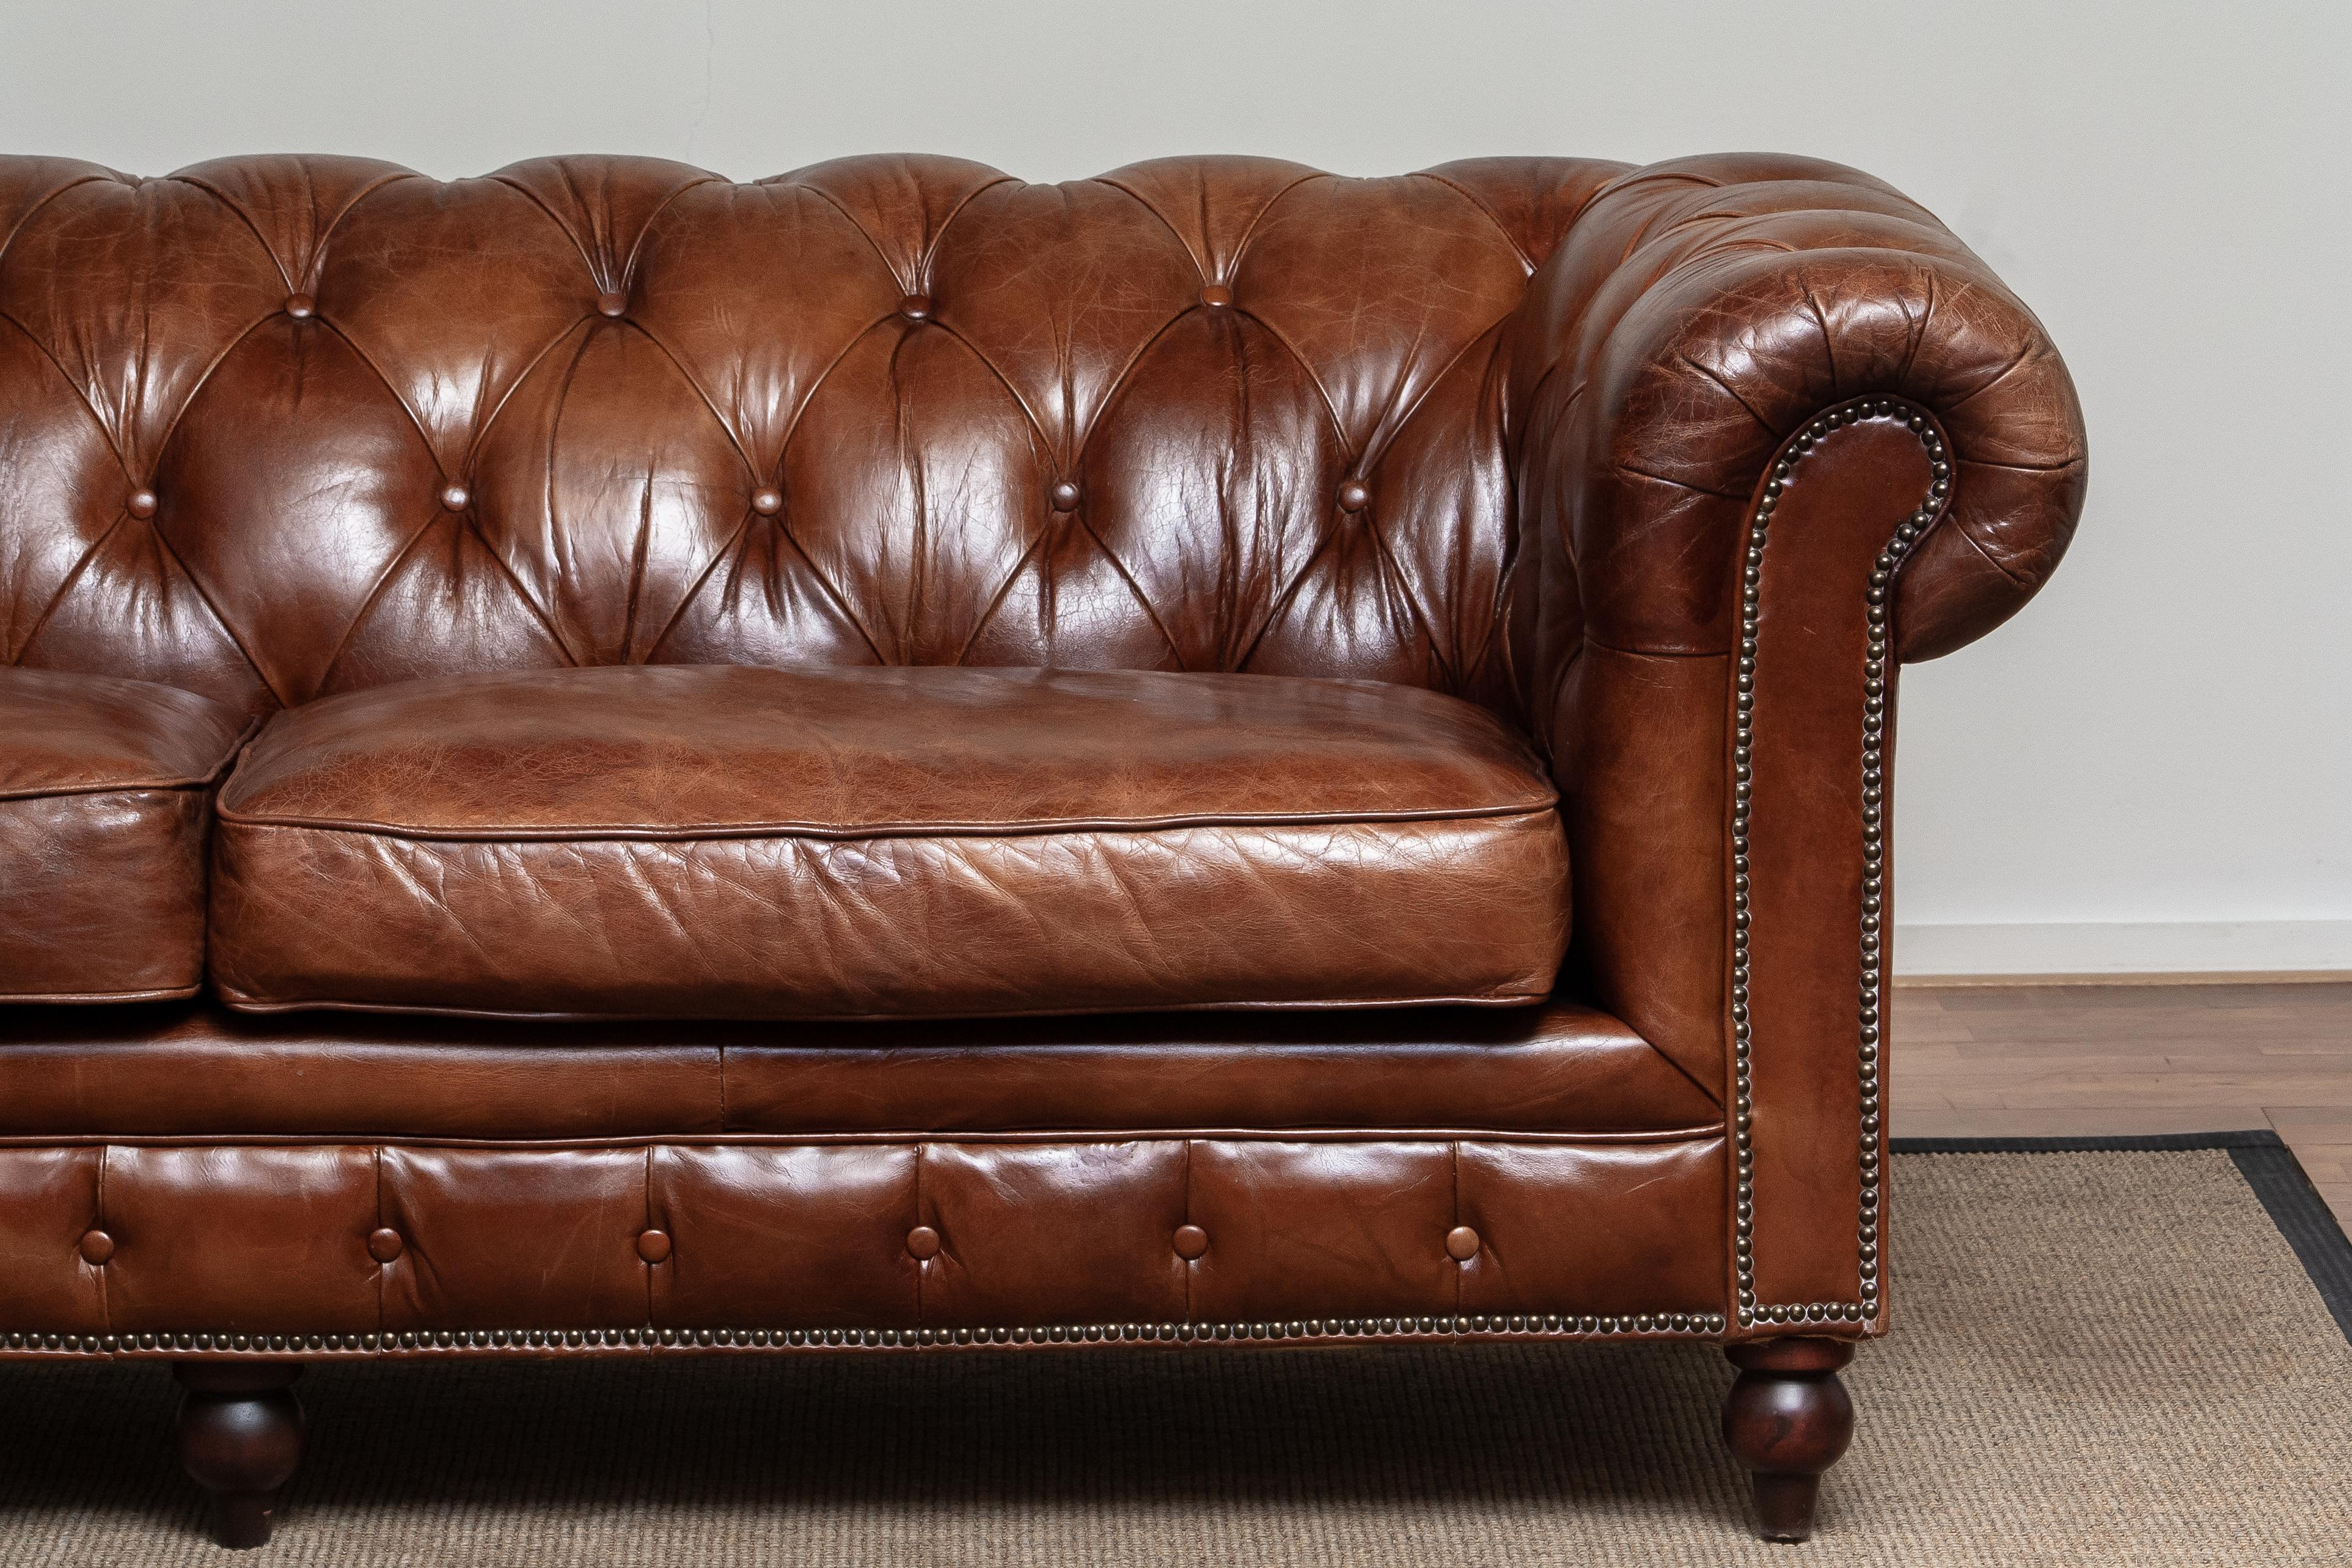 Tufted Brown Leather English Chesterfield Sofa from the 20th Century 10